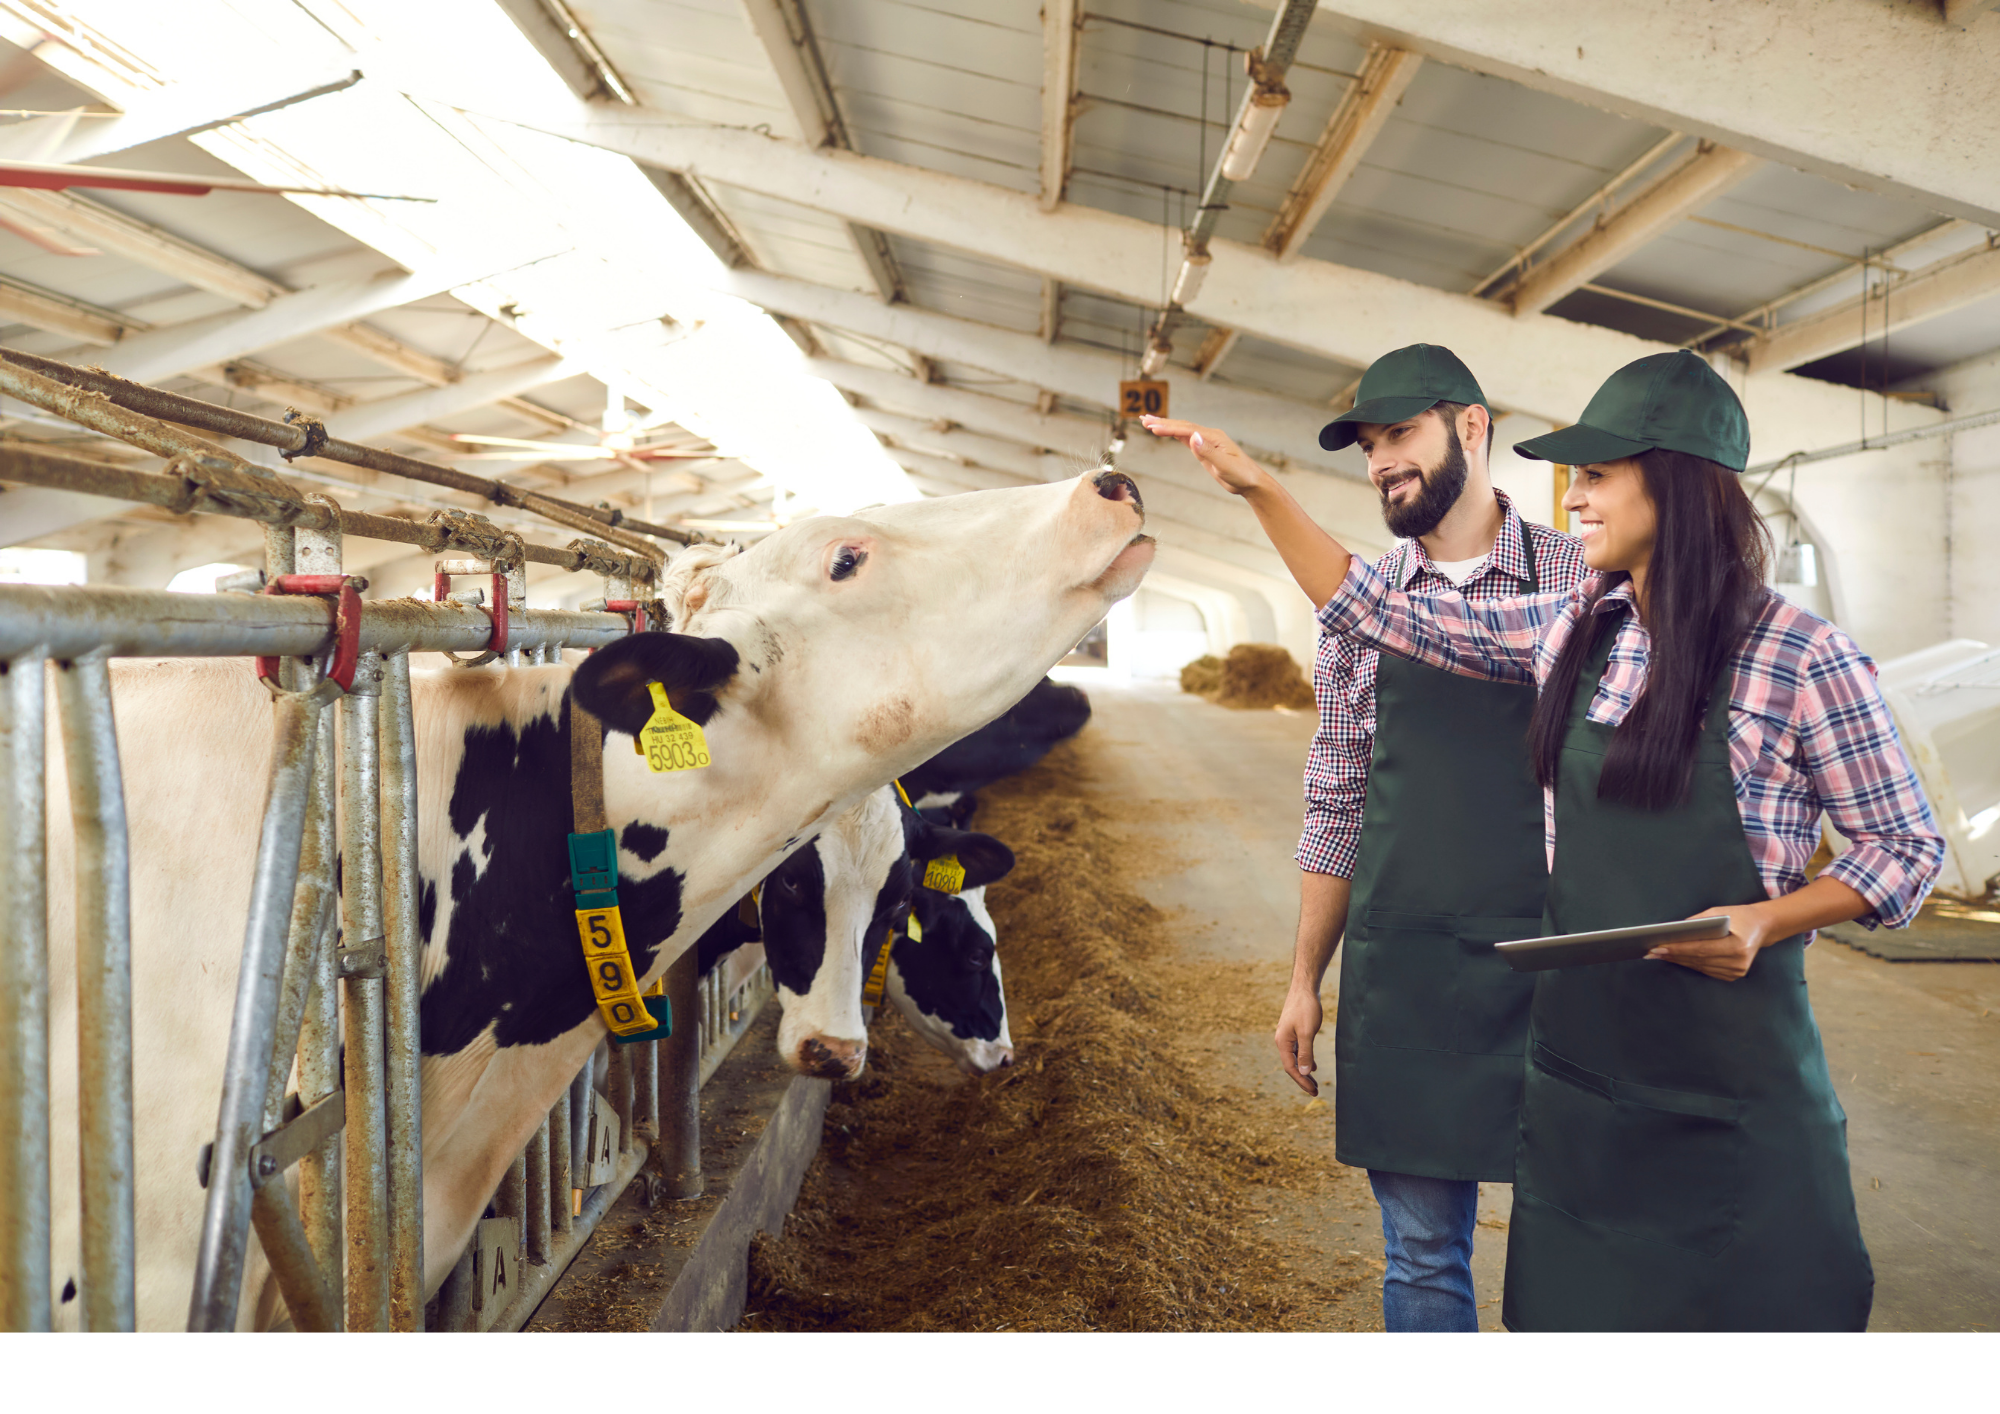 Livestock start-ups in the UK: A review of the innovation landscape